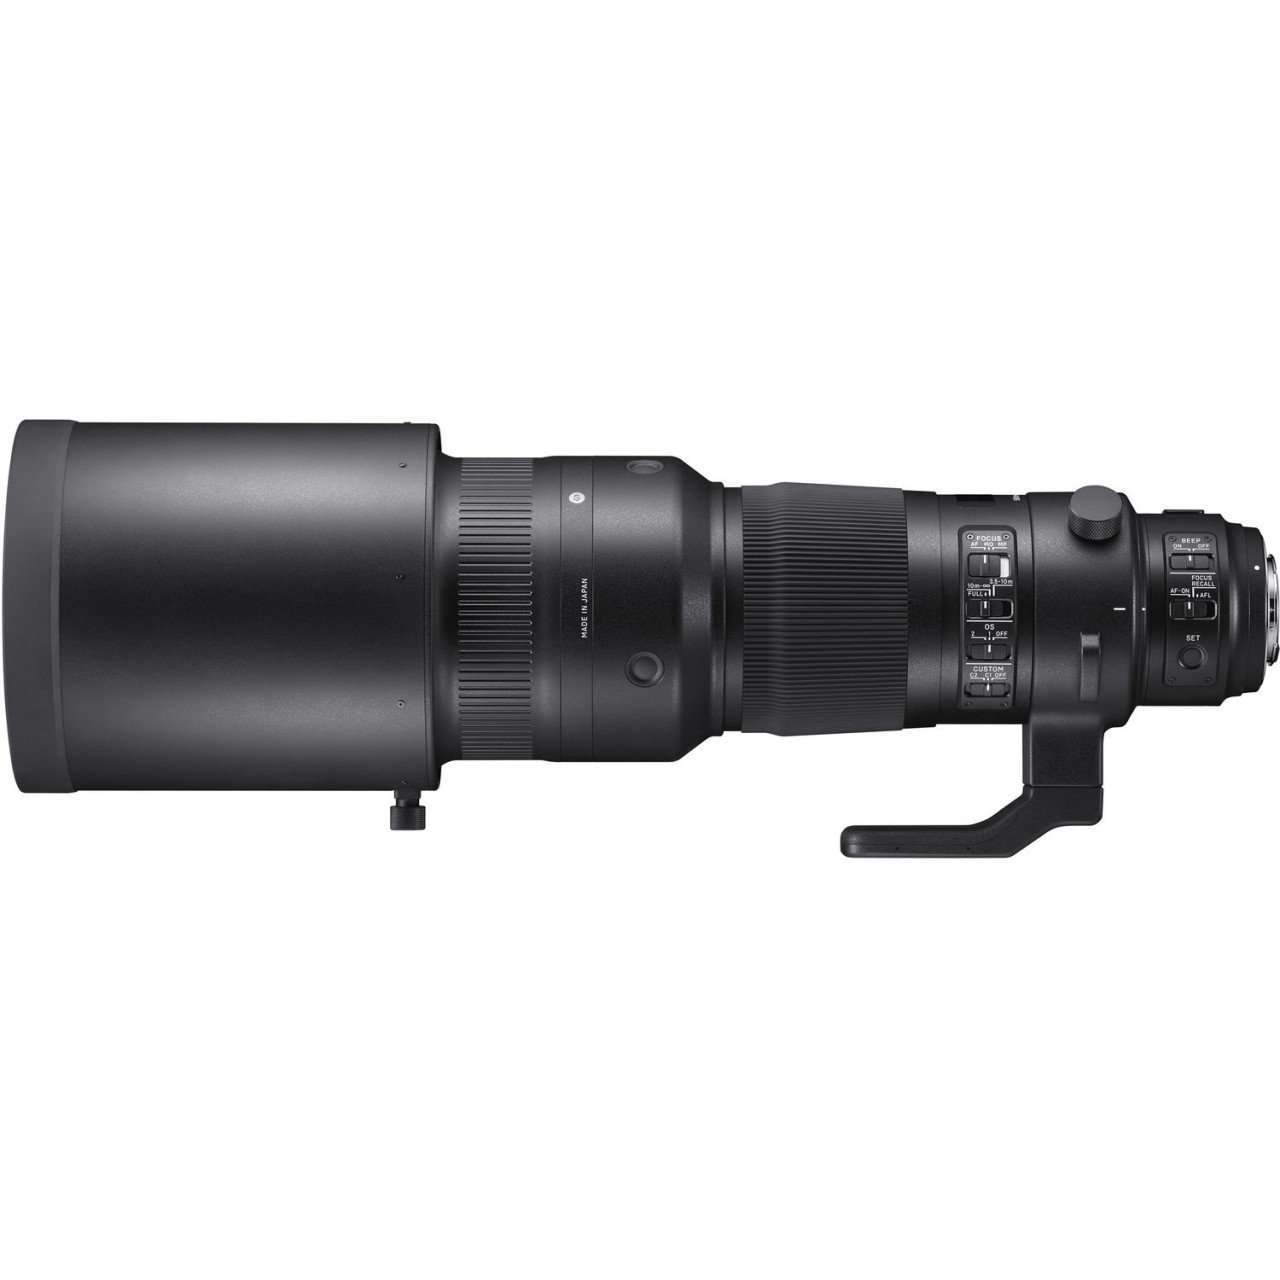 Sigma 500mm f/4 DG OS HSM Sports Lens for Canon EF Sigma Lens - DSLR Fixed Focal Length